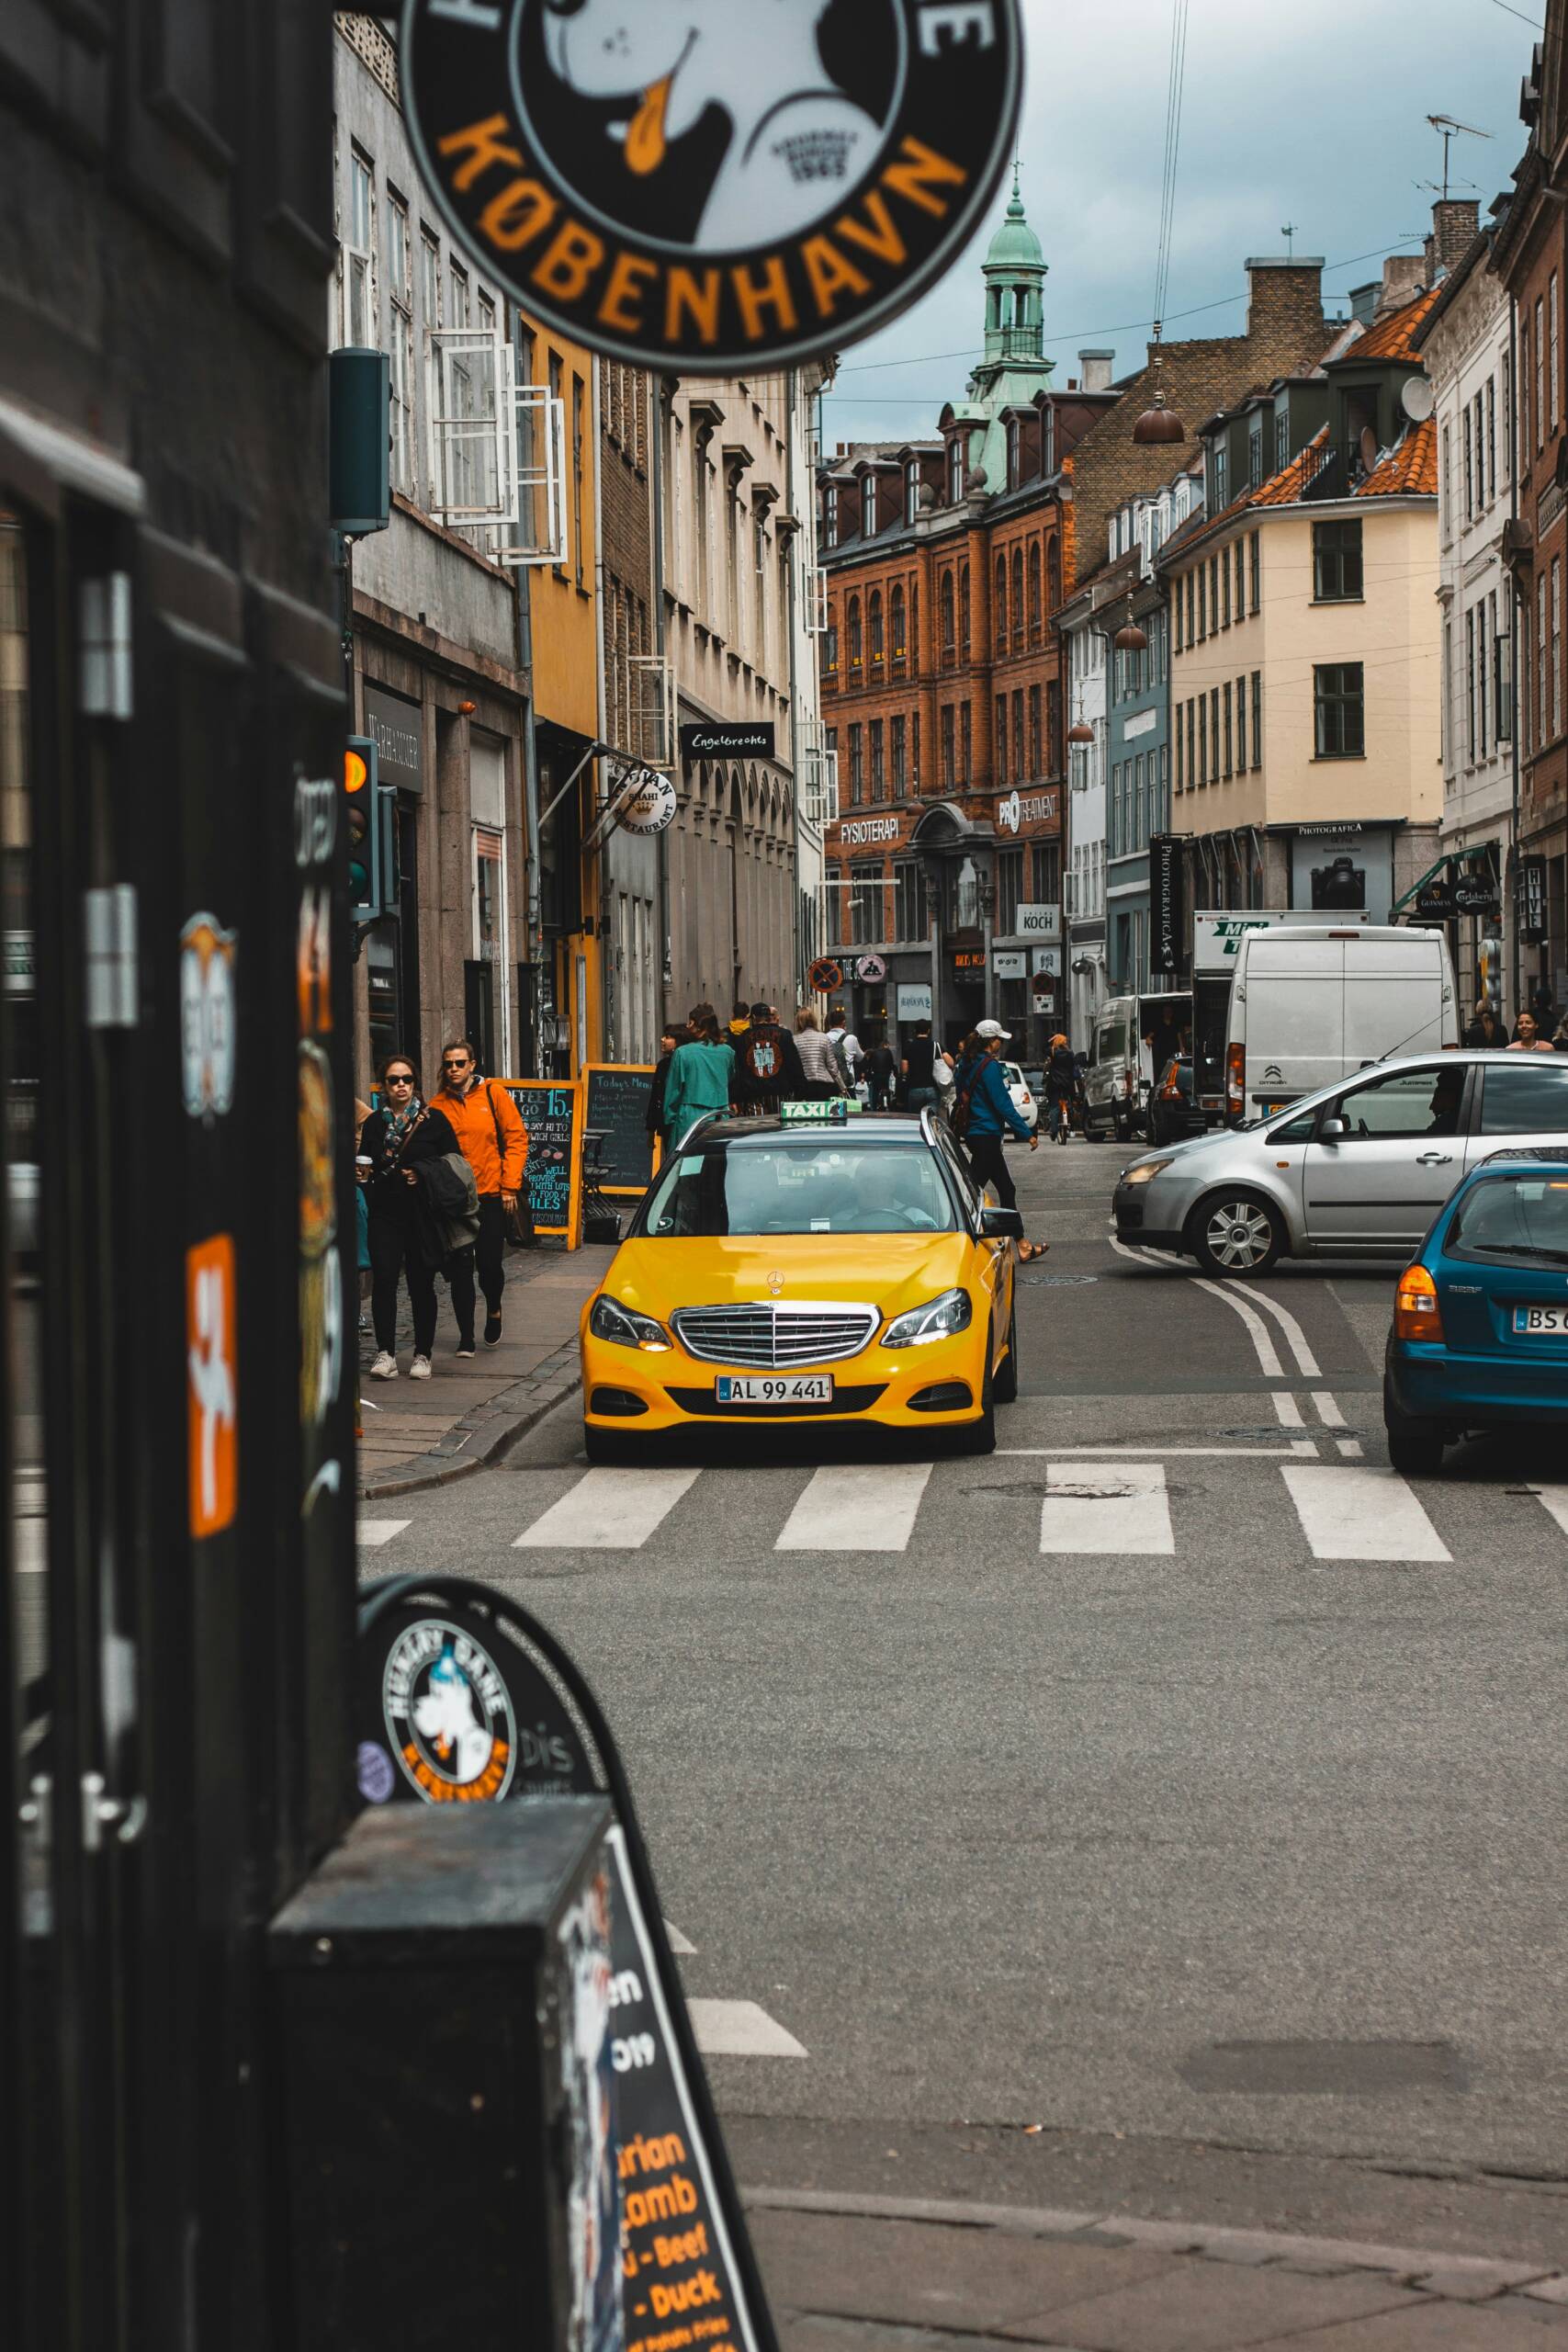 Street with yellow taxi.